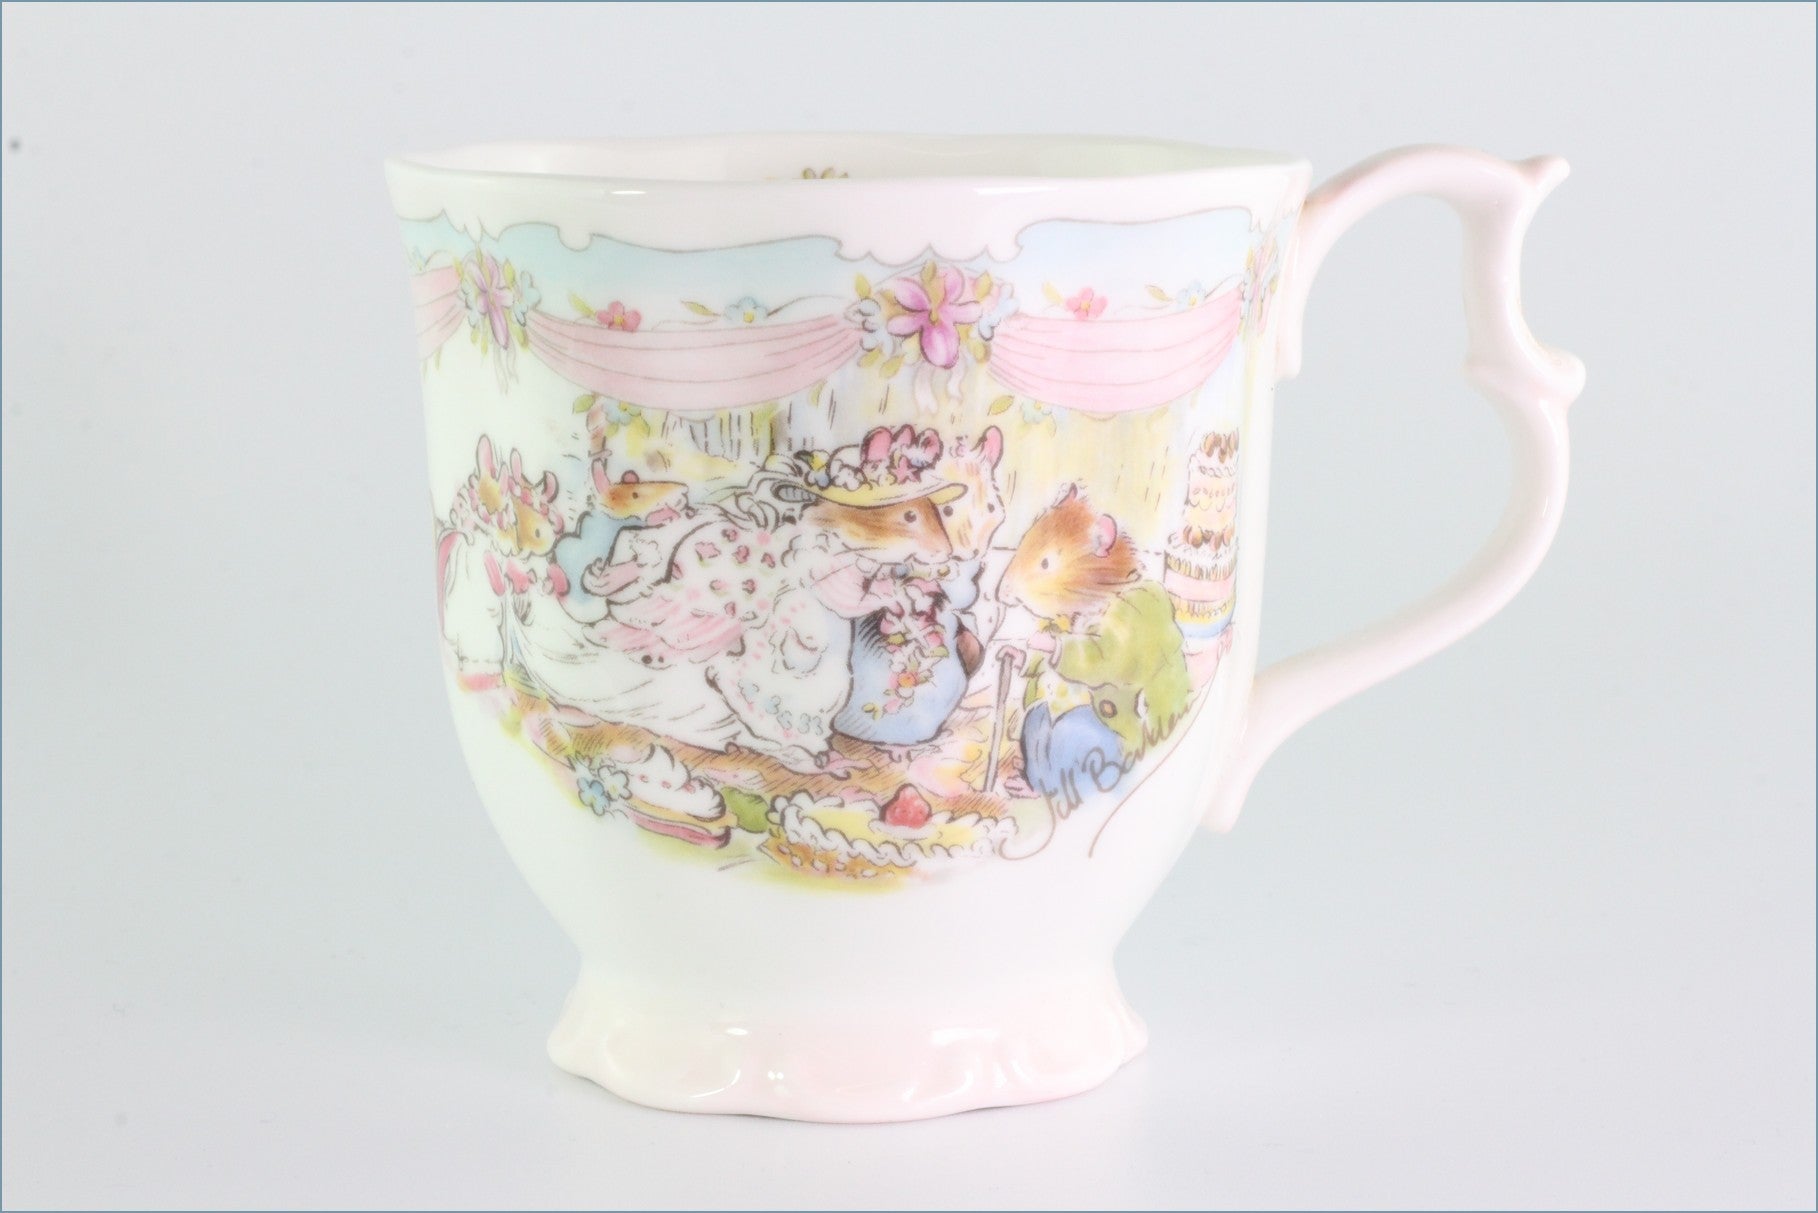 2 Piece Royal Doulton Brambly Hedge The Wedding Cup And Plate